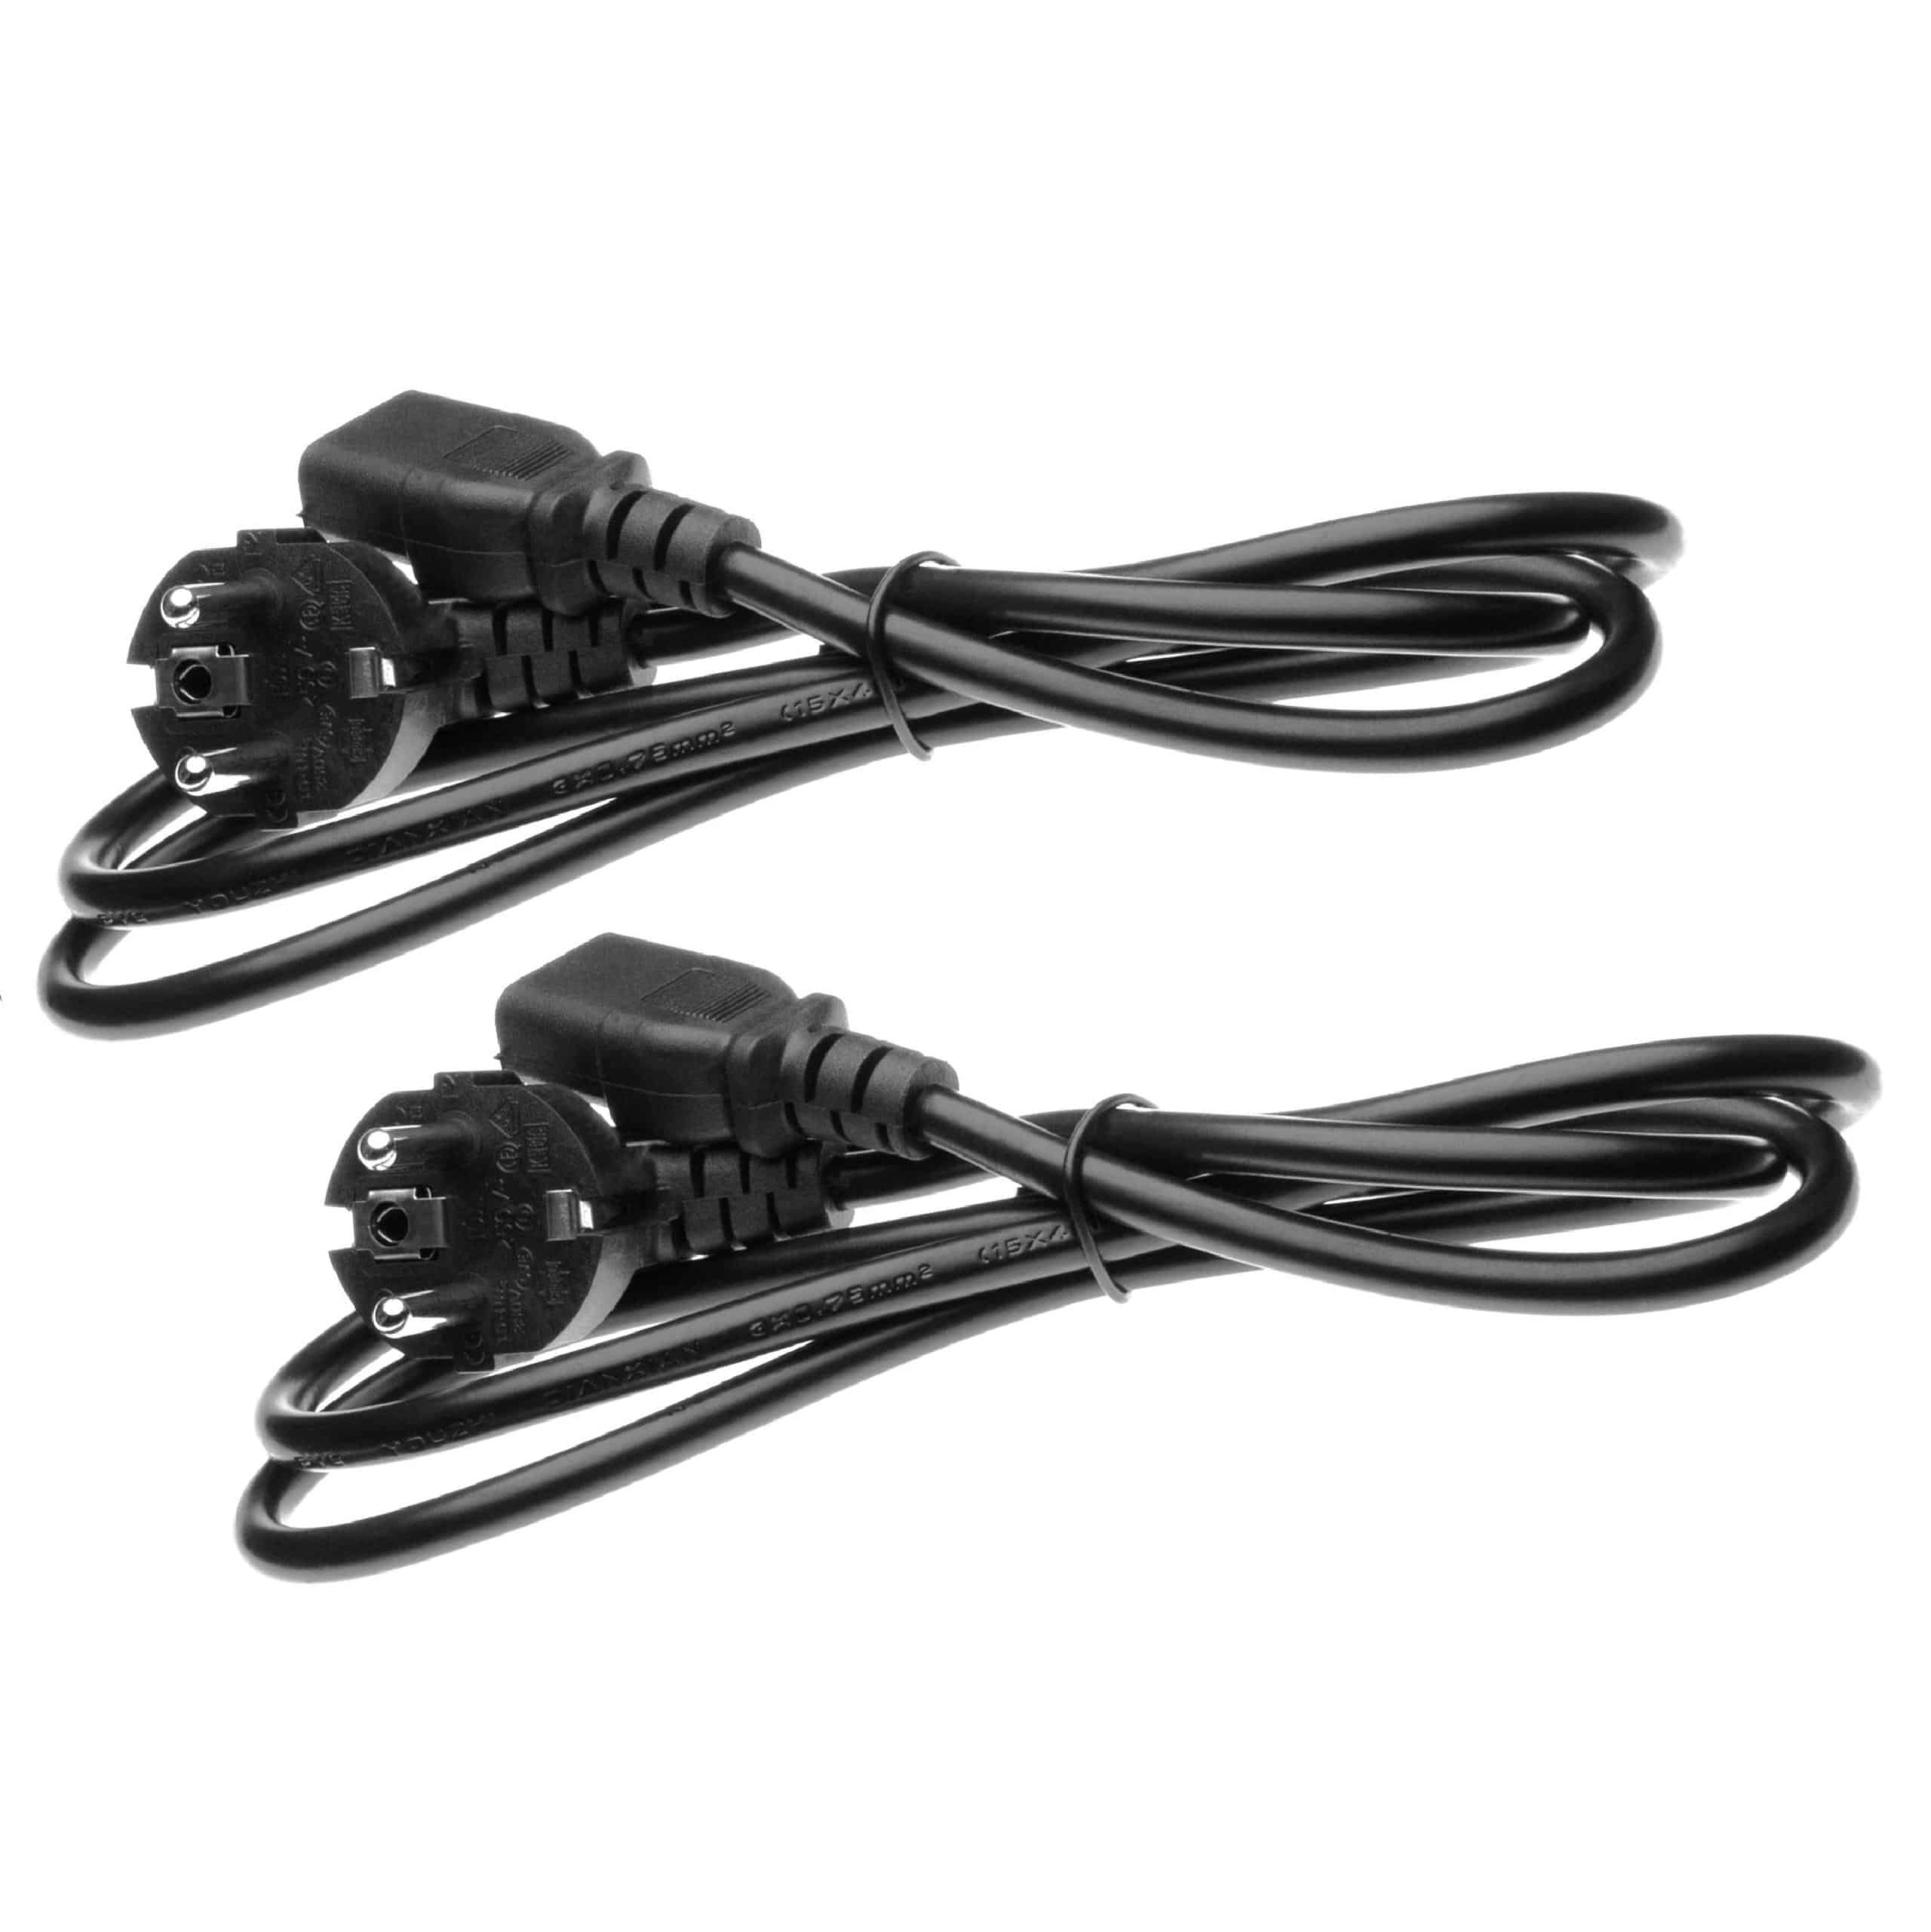 2x C13 Power Cable Euro Plug suitable for Devices e.g. PC Monitor Computer - 1.2 m